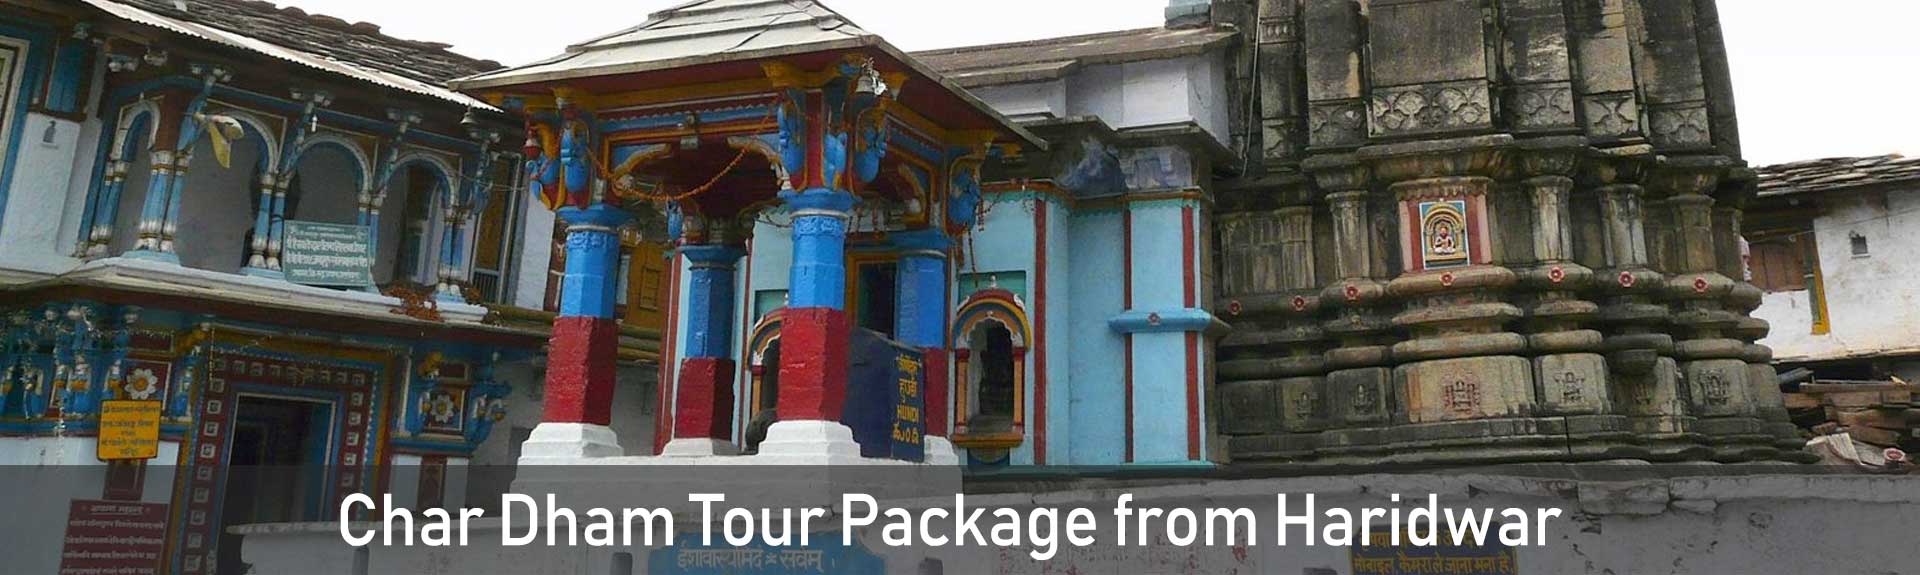 Char Dham tour package from Haridwar